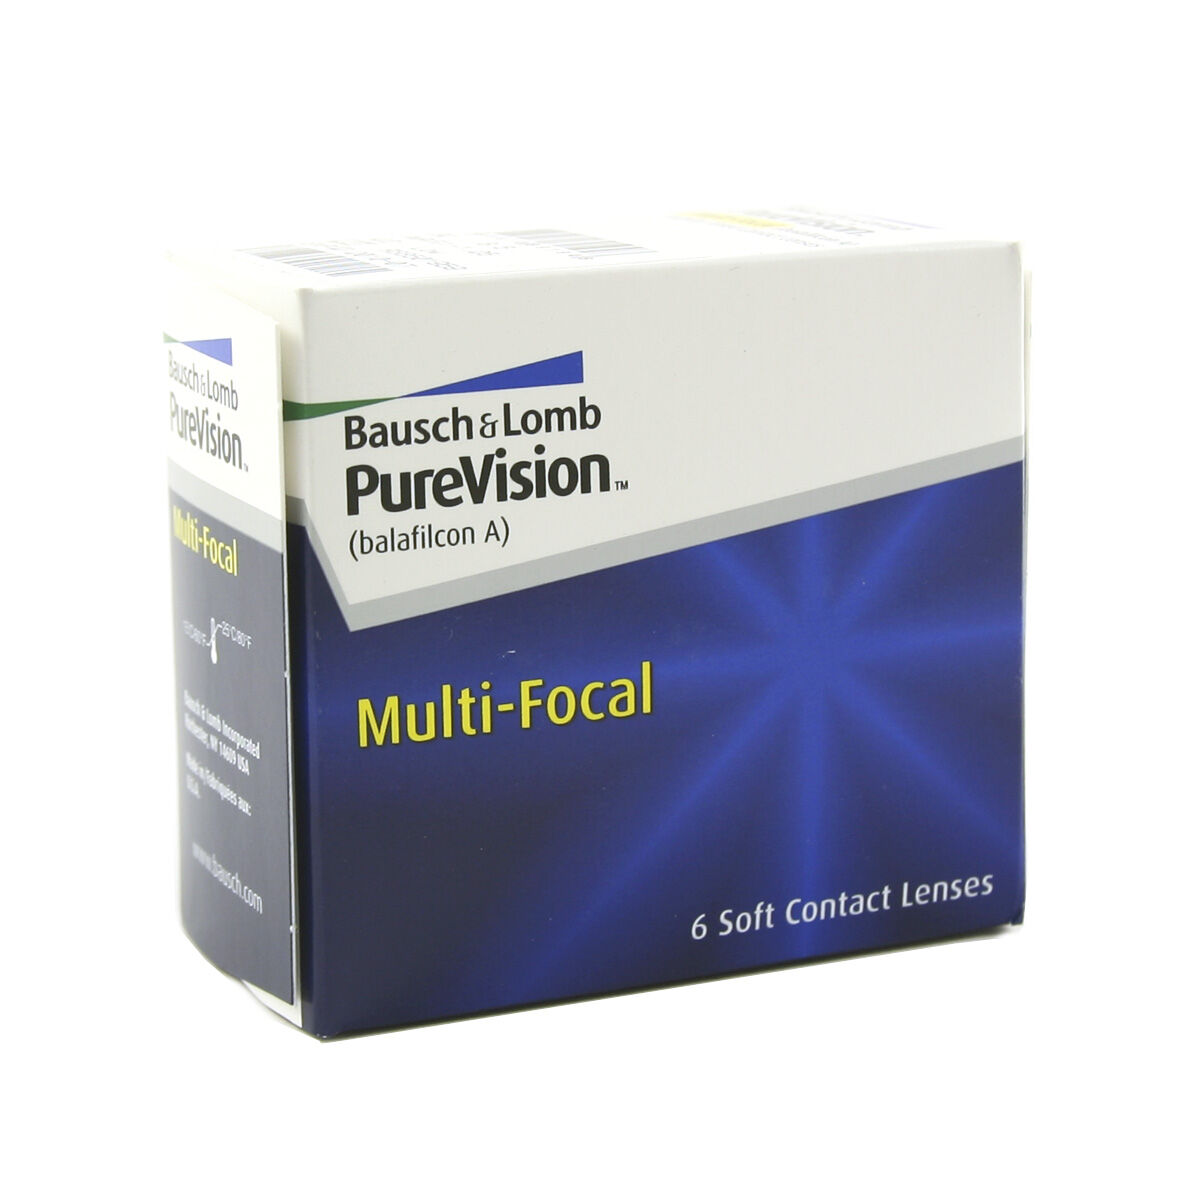 Bausch & Lomb Purevision Multi-Focal (6 Contact Lenses), Bausch & Lomb, Multi-Focal Monthly Disposables, Balafilcon A